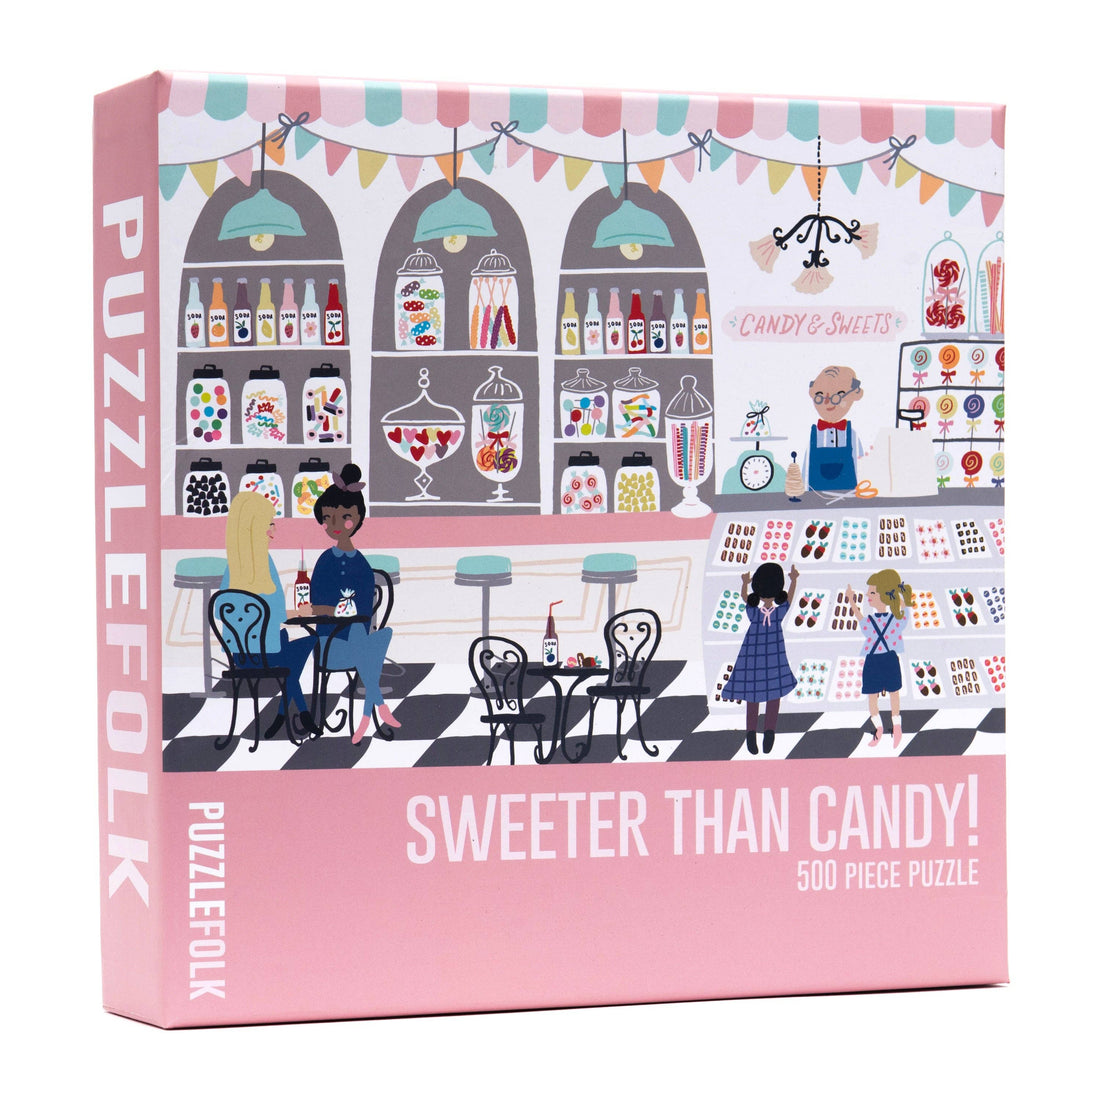 Sweeter Than Candy! 500 Piece Puzzle